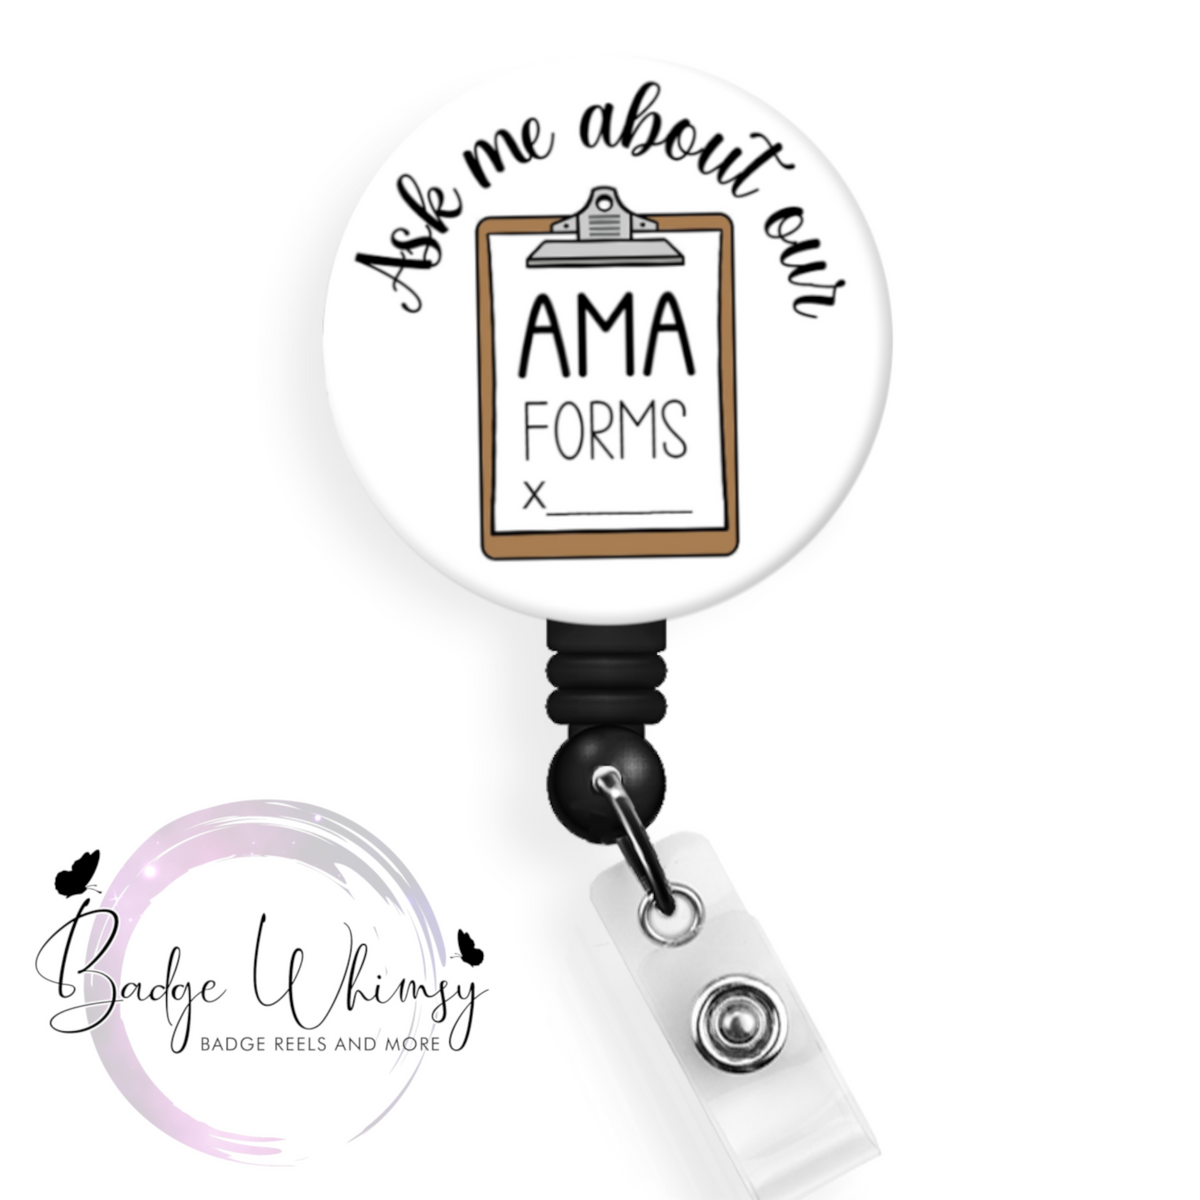 Ask Me About Our AMA Forms. Funny Healthcare Badge Reel. Cute Healthcare or  Other Badge Reel. High Quality 100% Free Shipping Badge. 